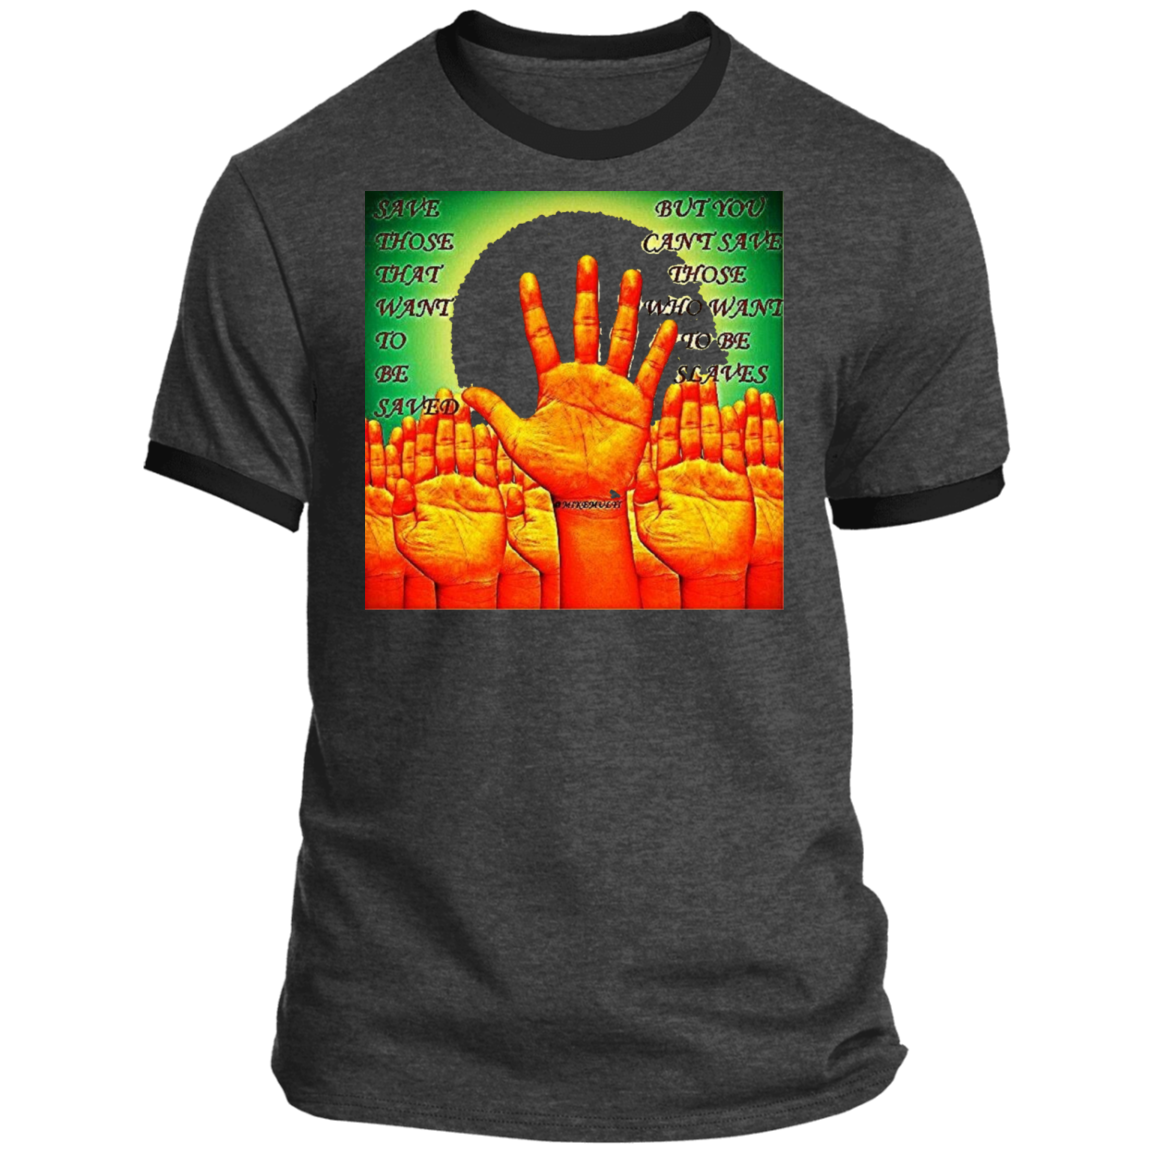 Multi - Save Those That Want To Be Saved - Men's Ringer T-shirt